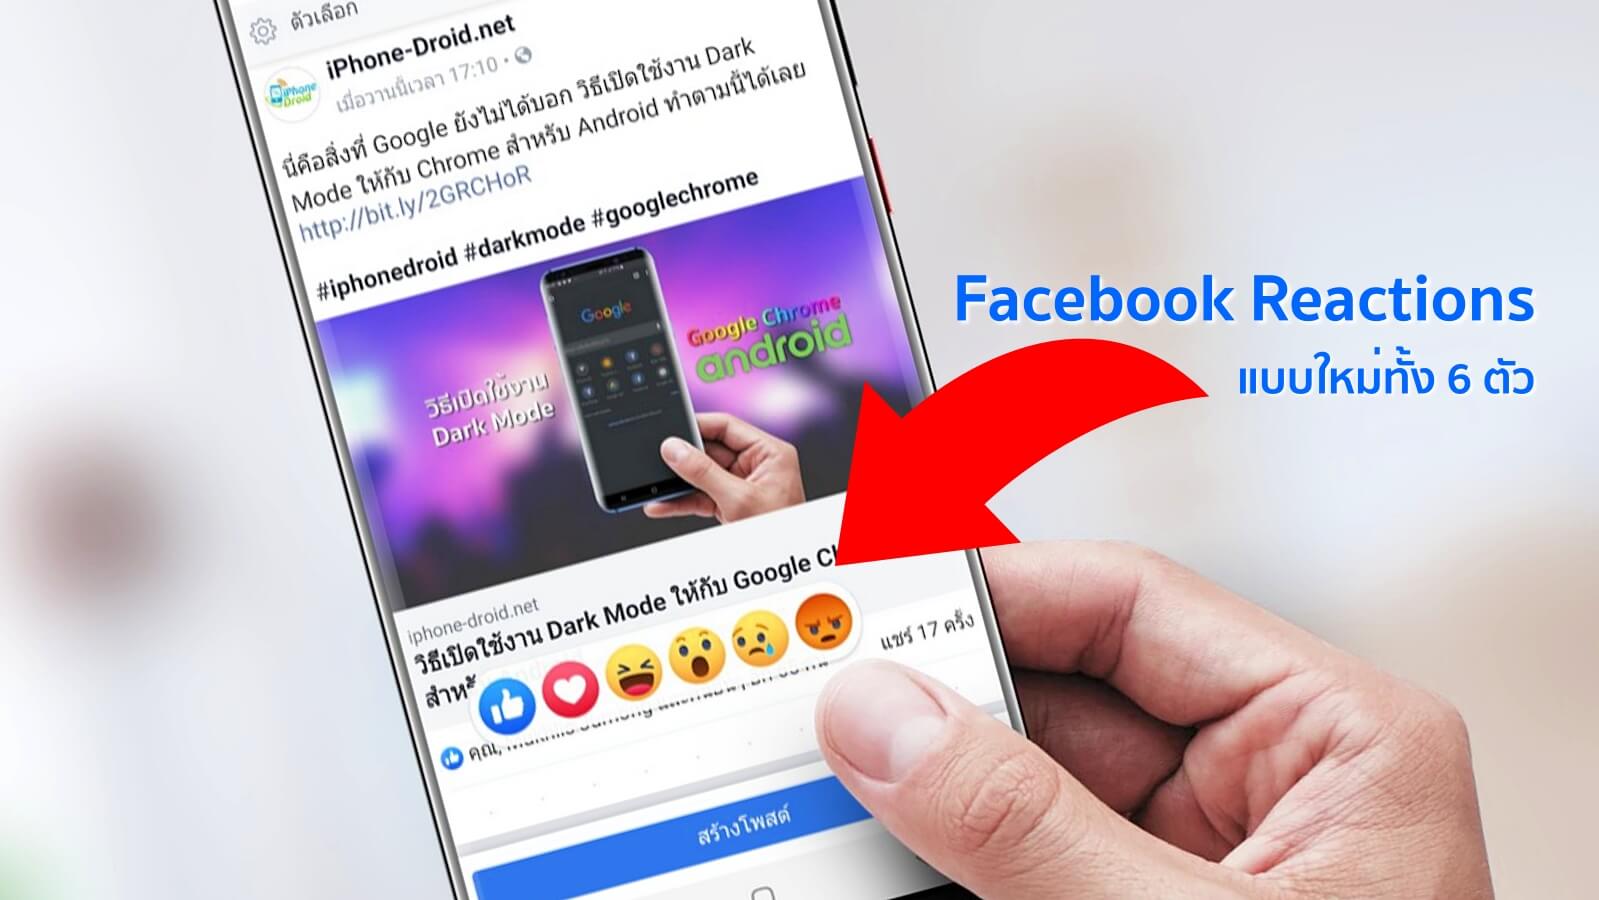 New Facebook Reactions 2019